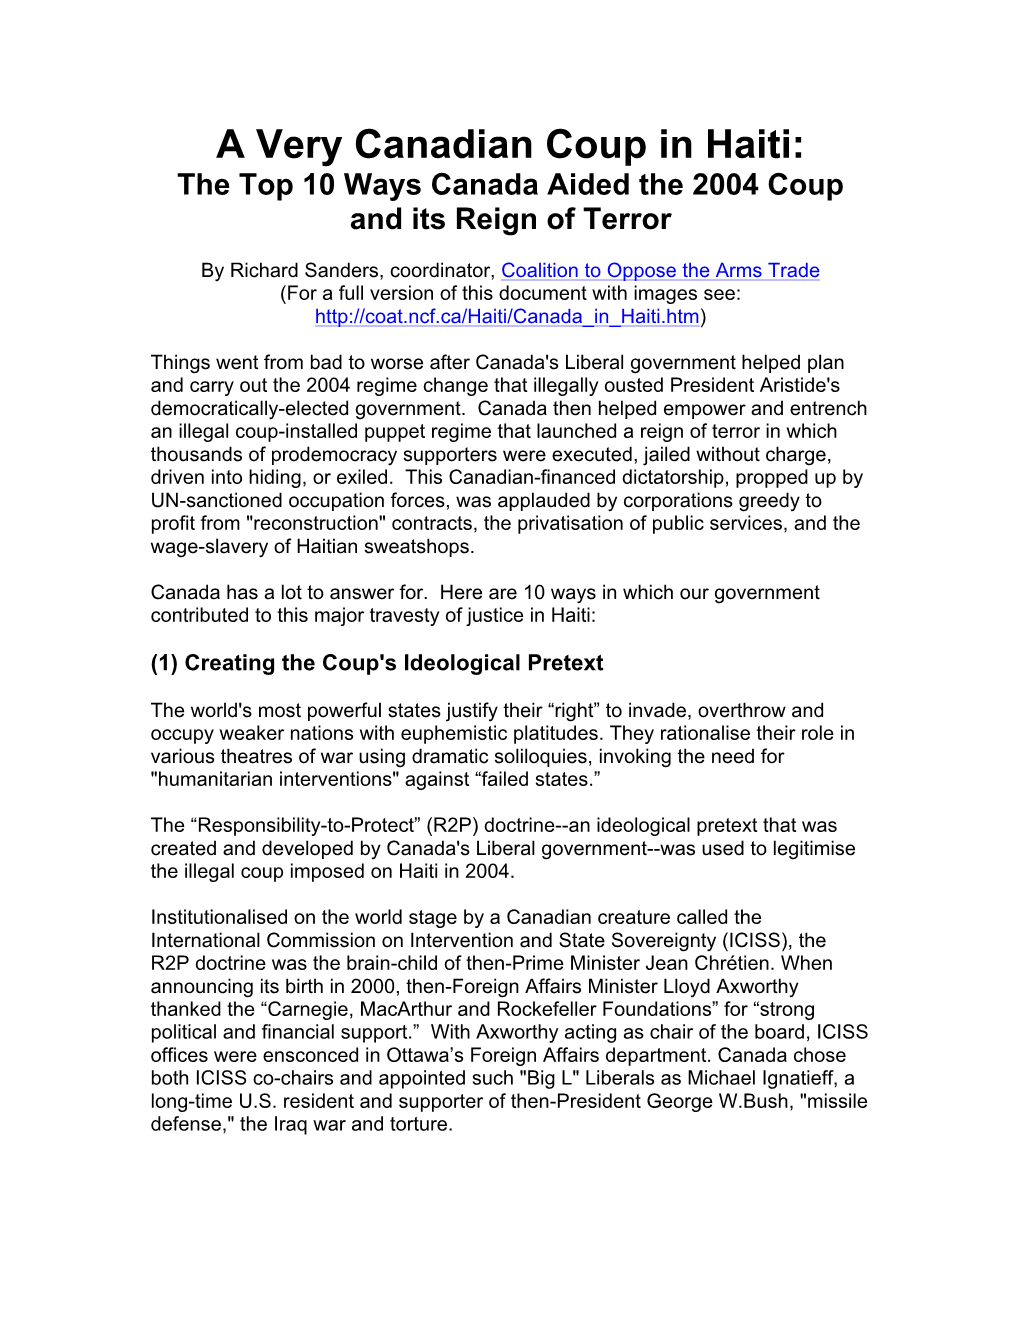 A Very Canadian Coup in Haiti: the Top 10 Ways Canada Aided the 2004 Coup and Its Reign of Terror